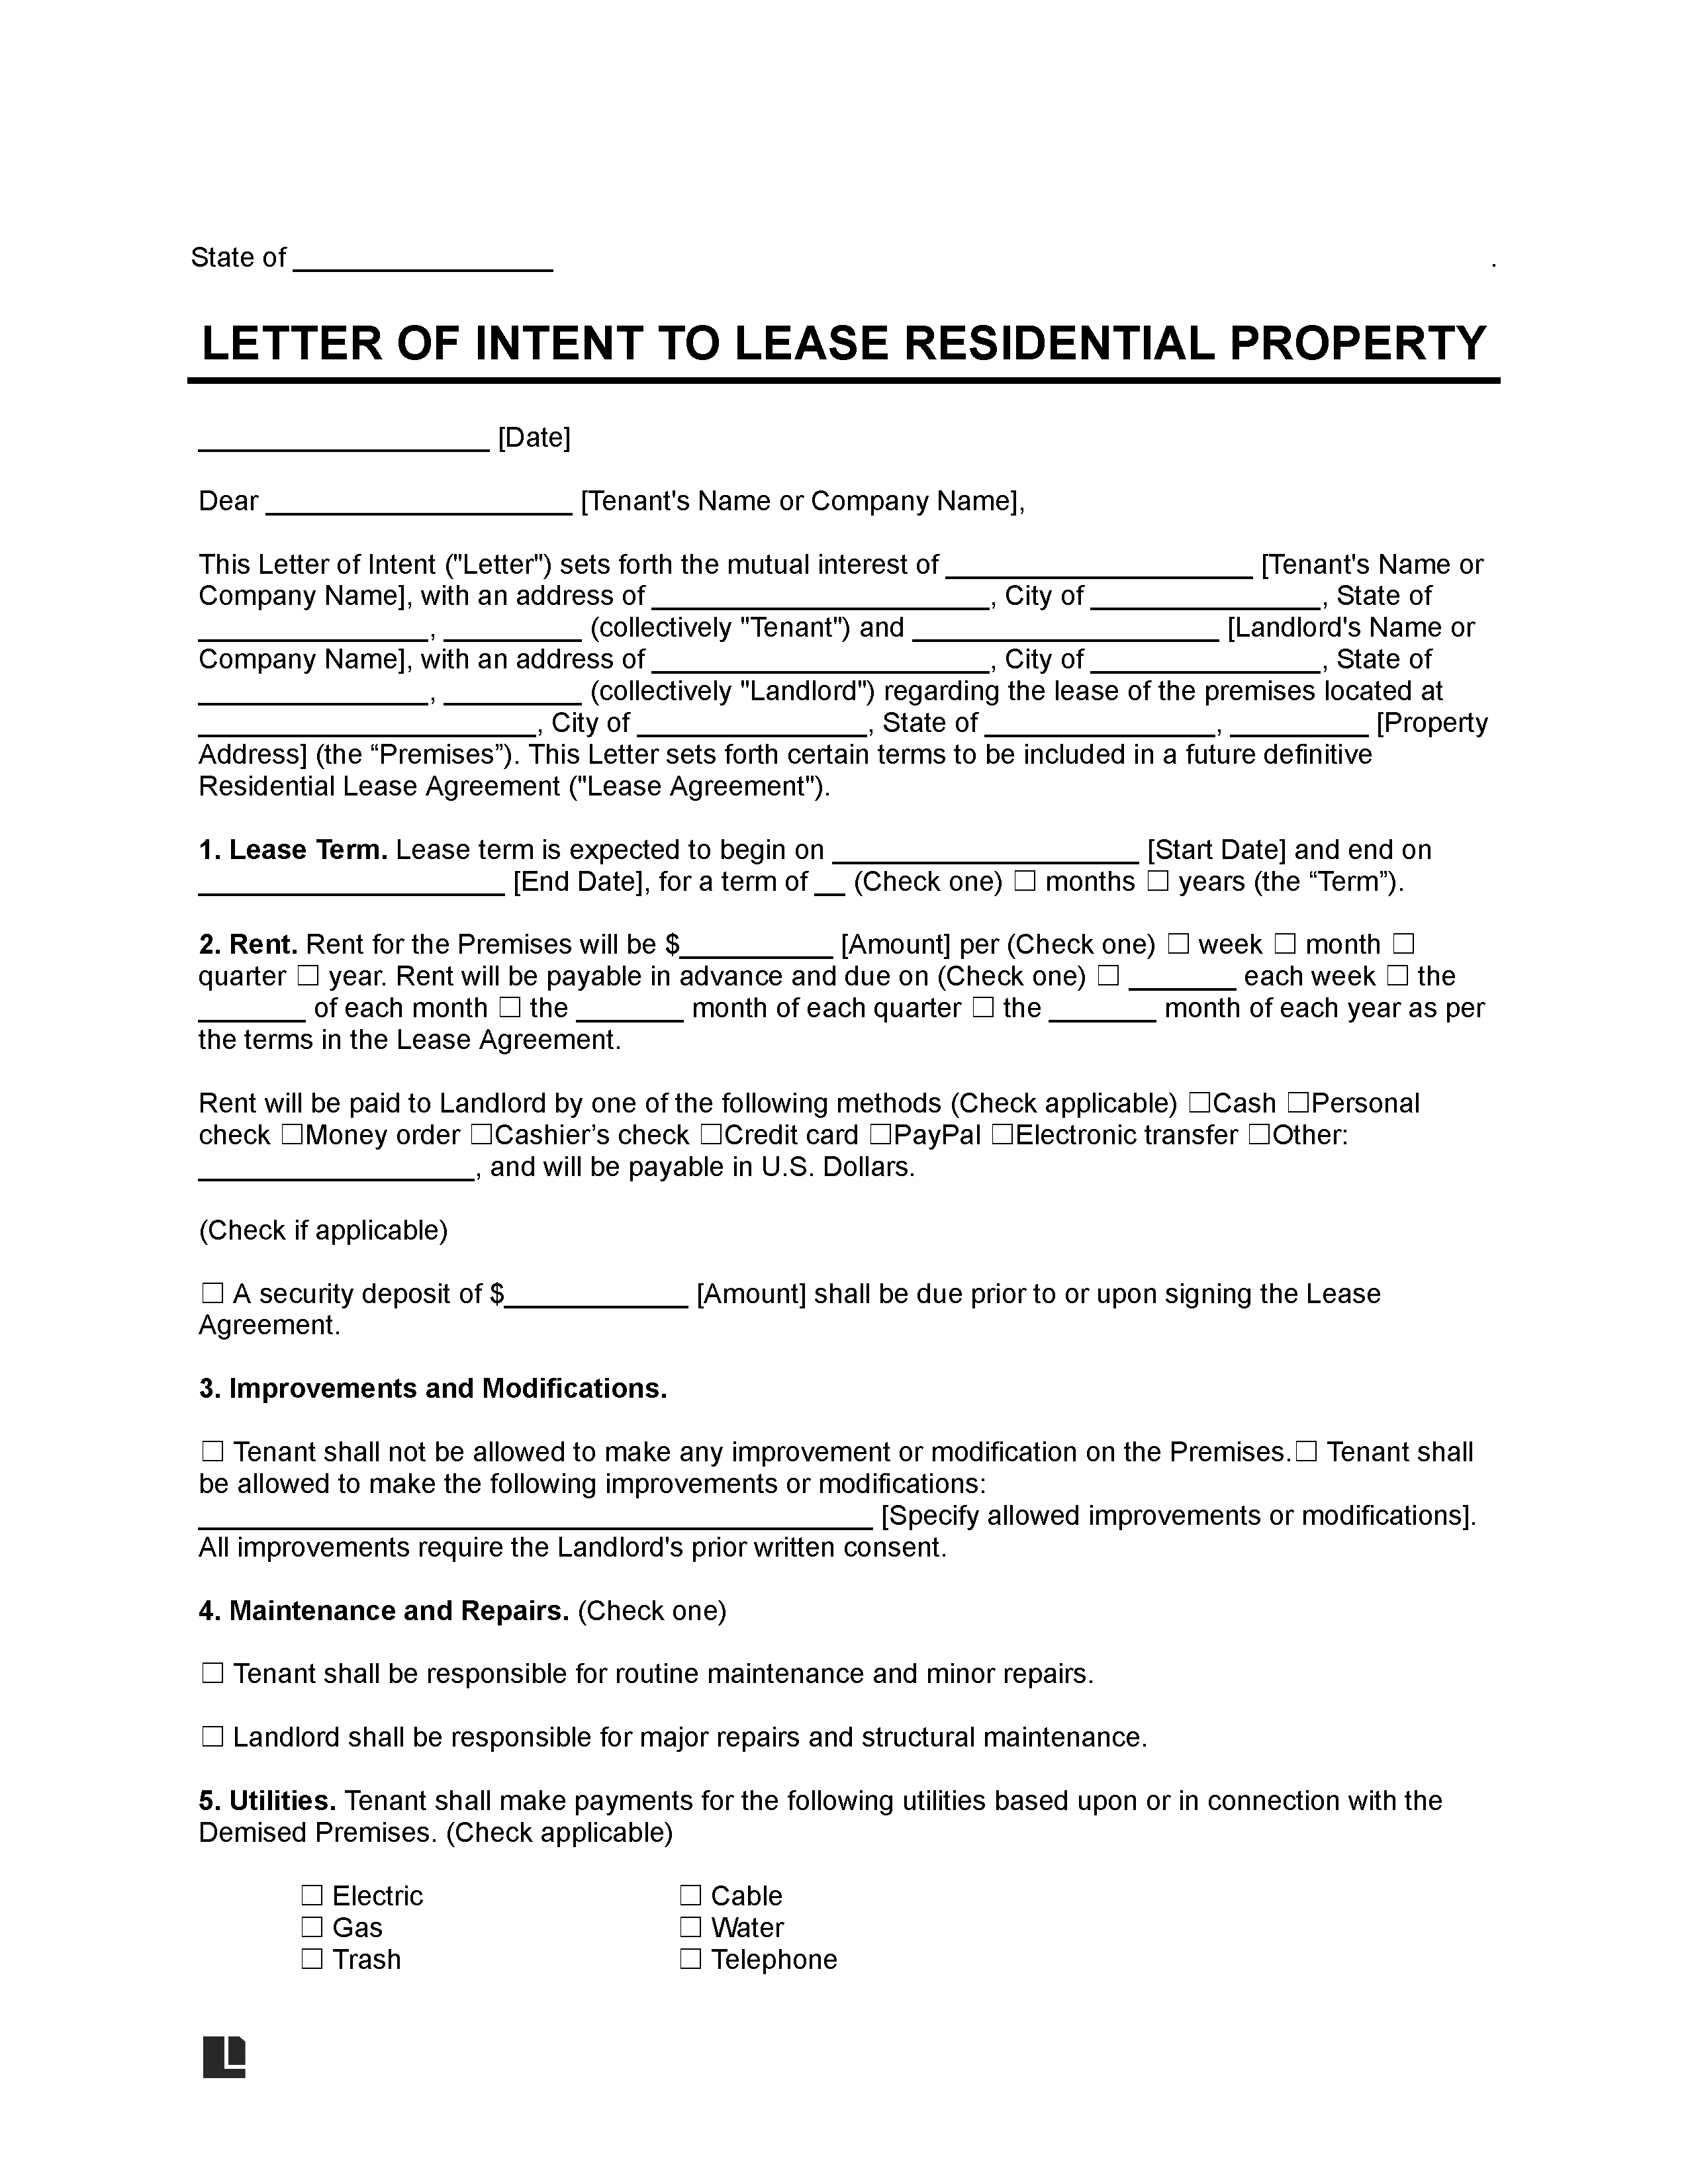 residential lease letter of intent template